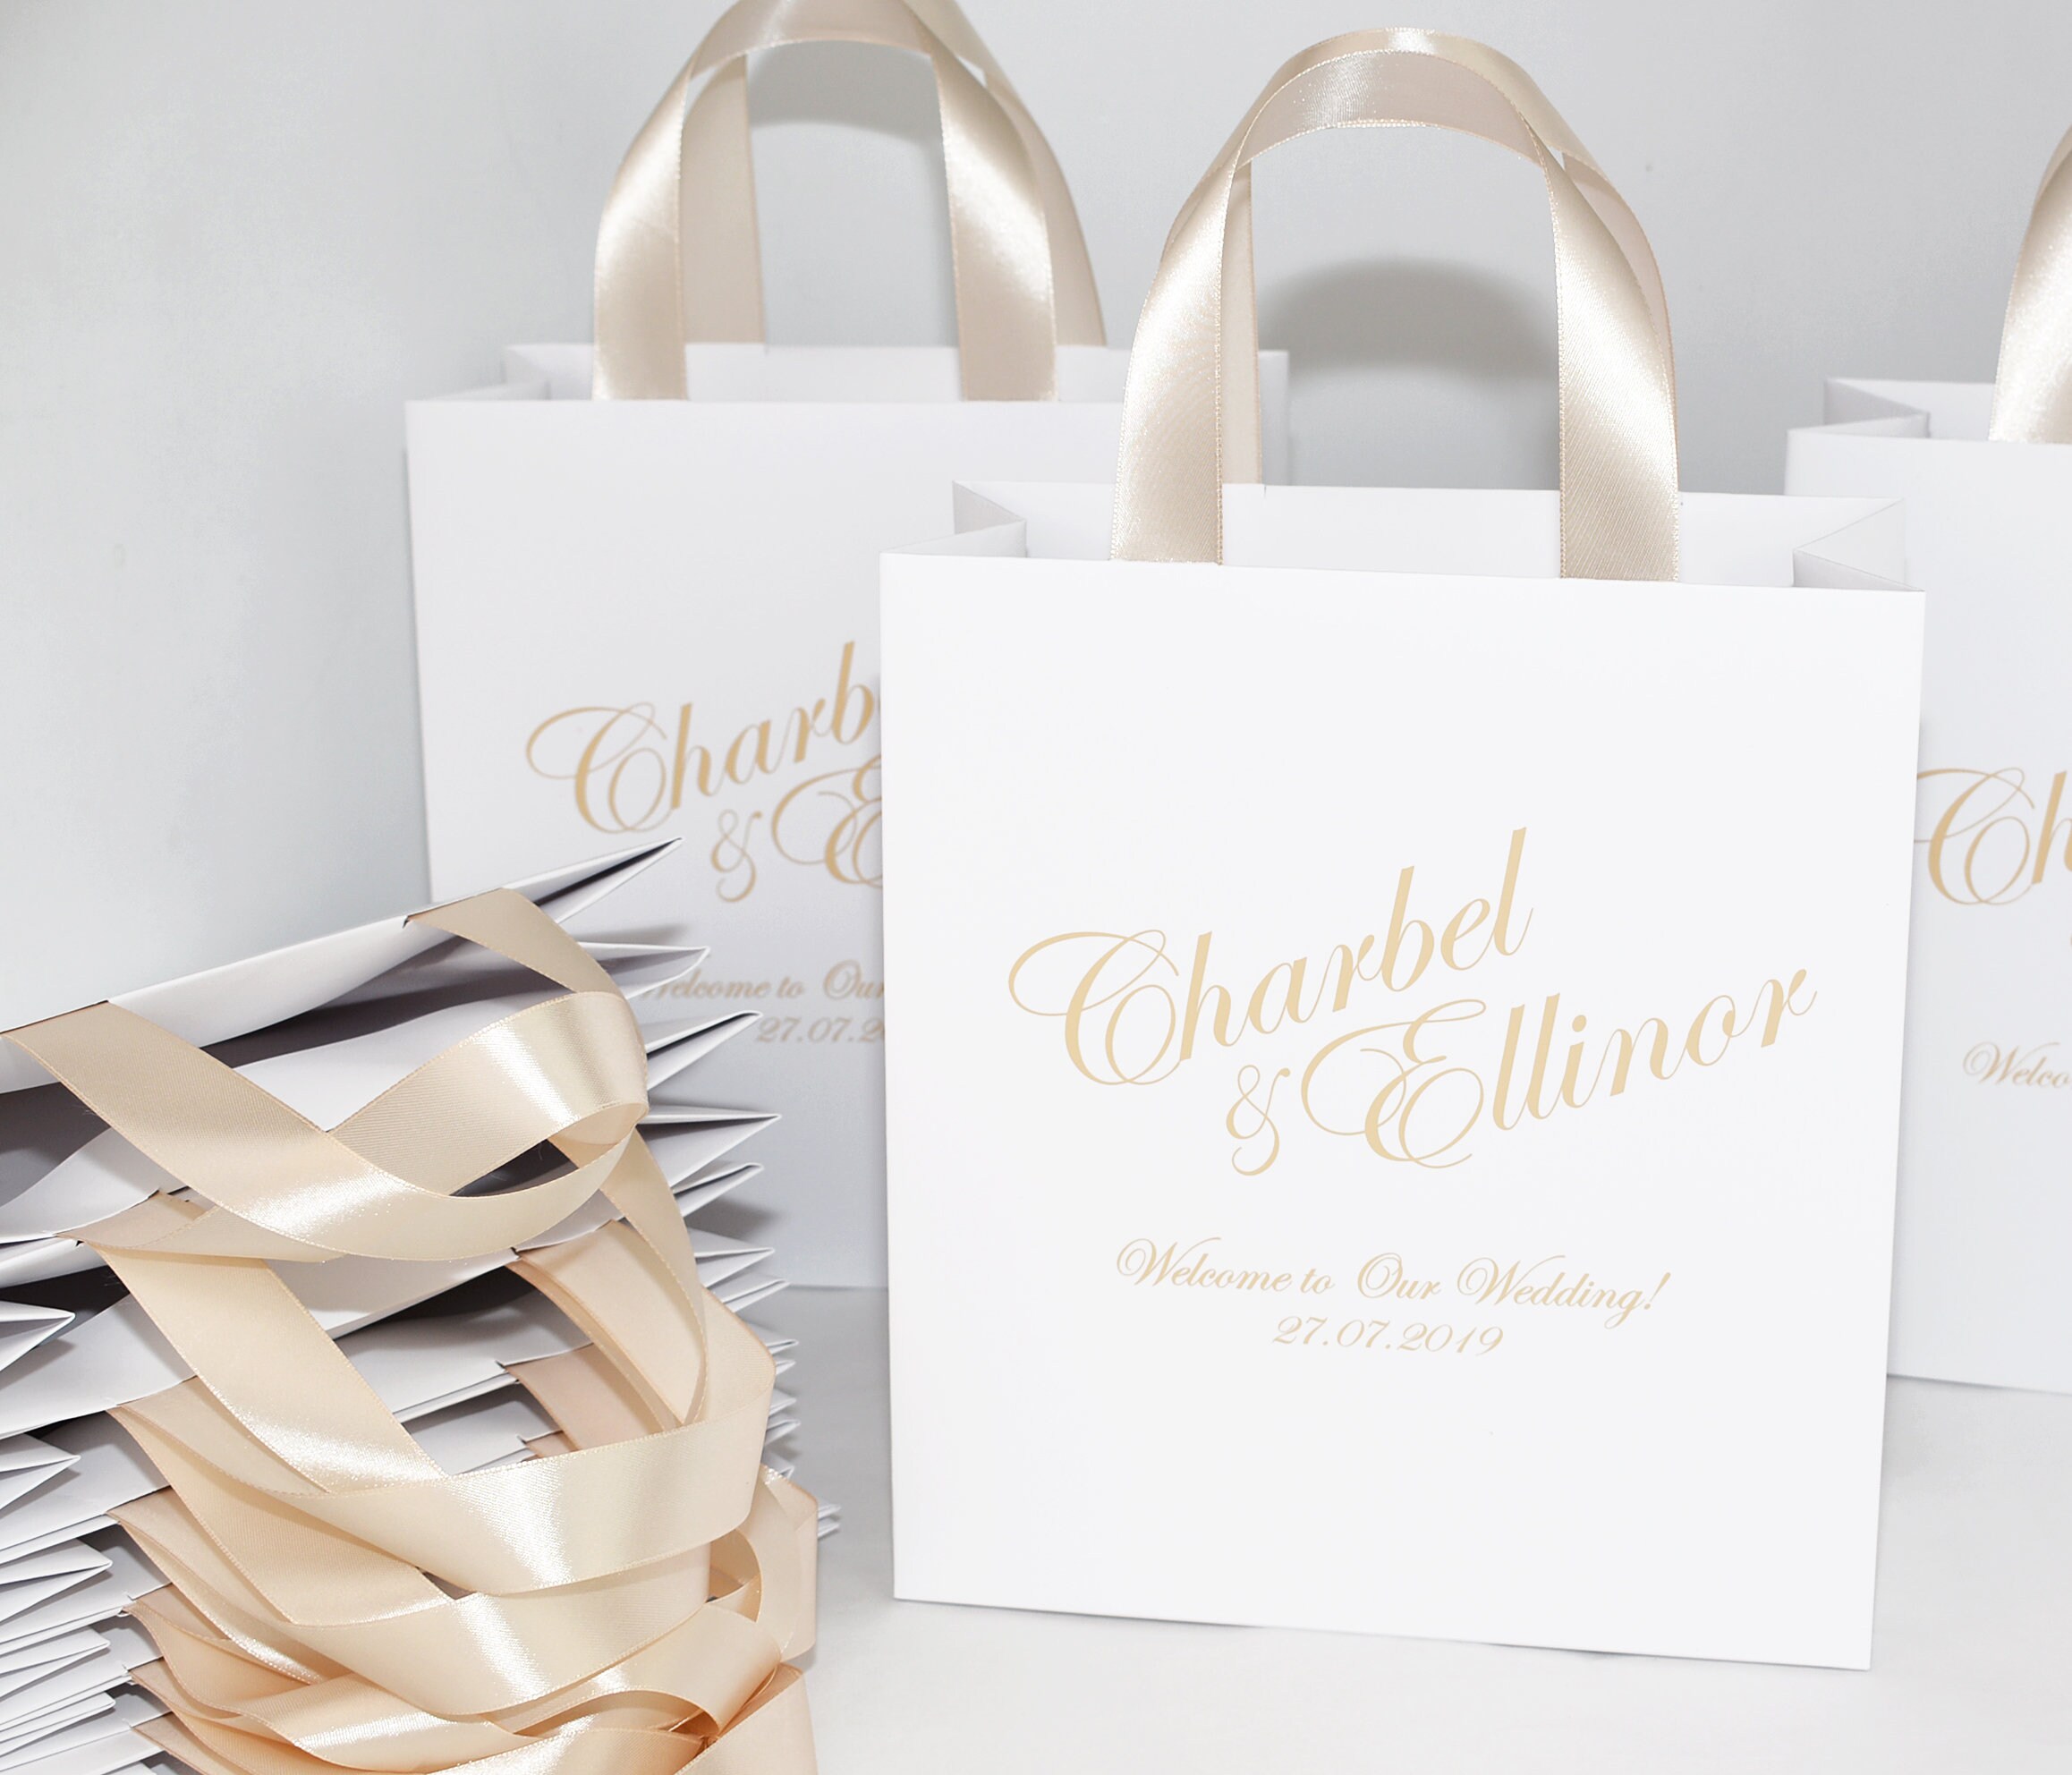 Elegant Wedding Welcome Bag With Satin Ribbon Handles and Custom Tag,  Personalized Black & Gold Gift Bags for Wedding Favor for Guests 